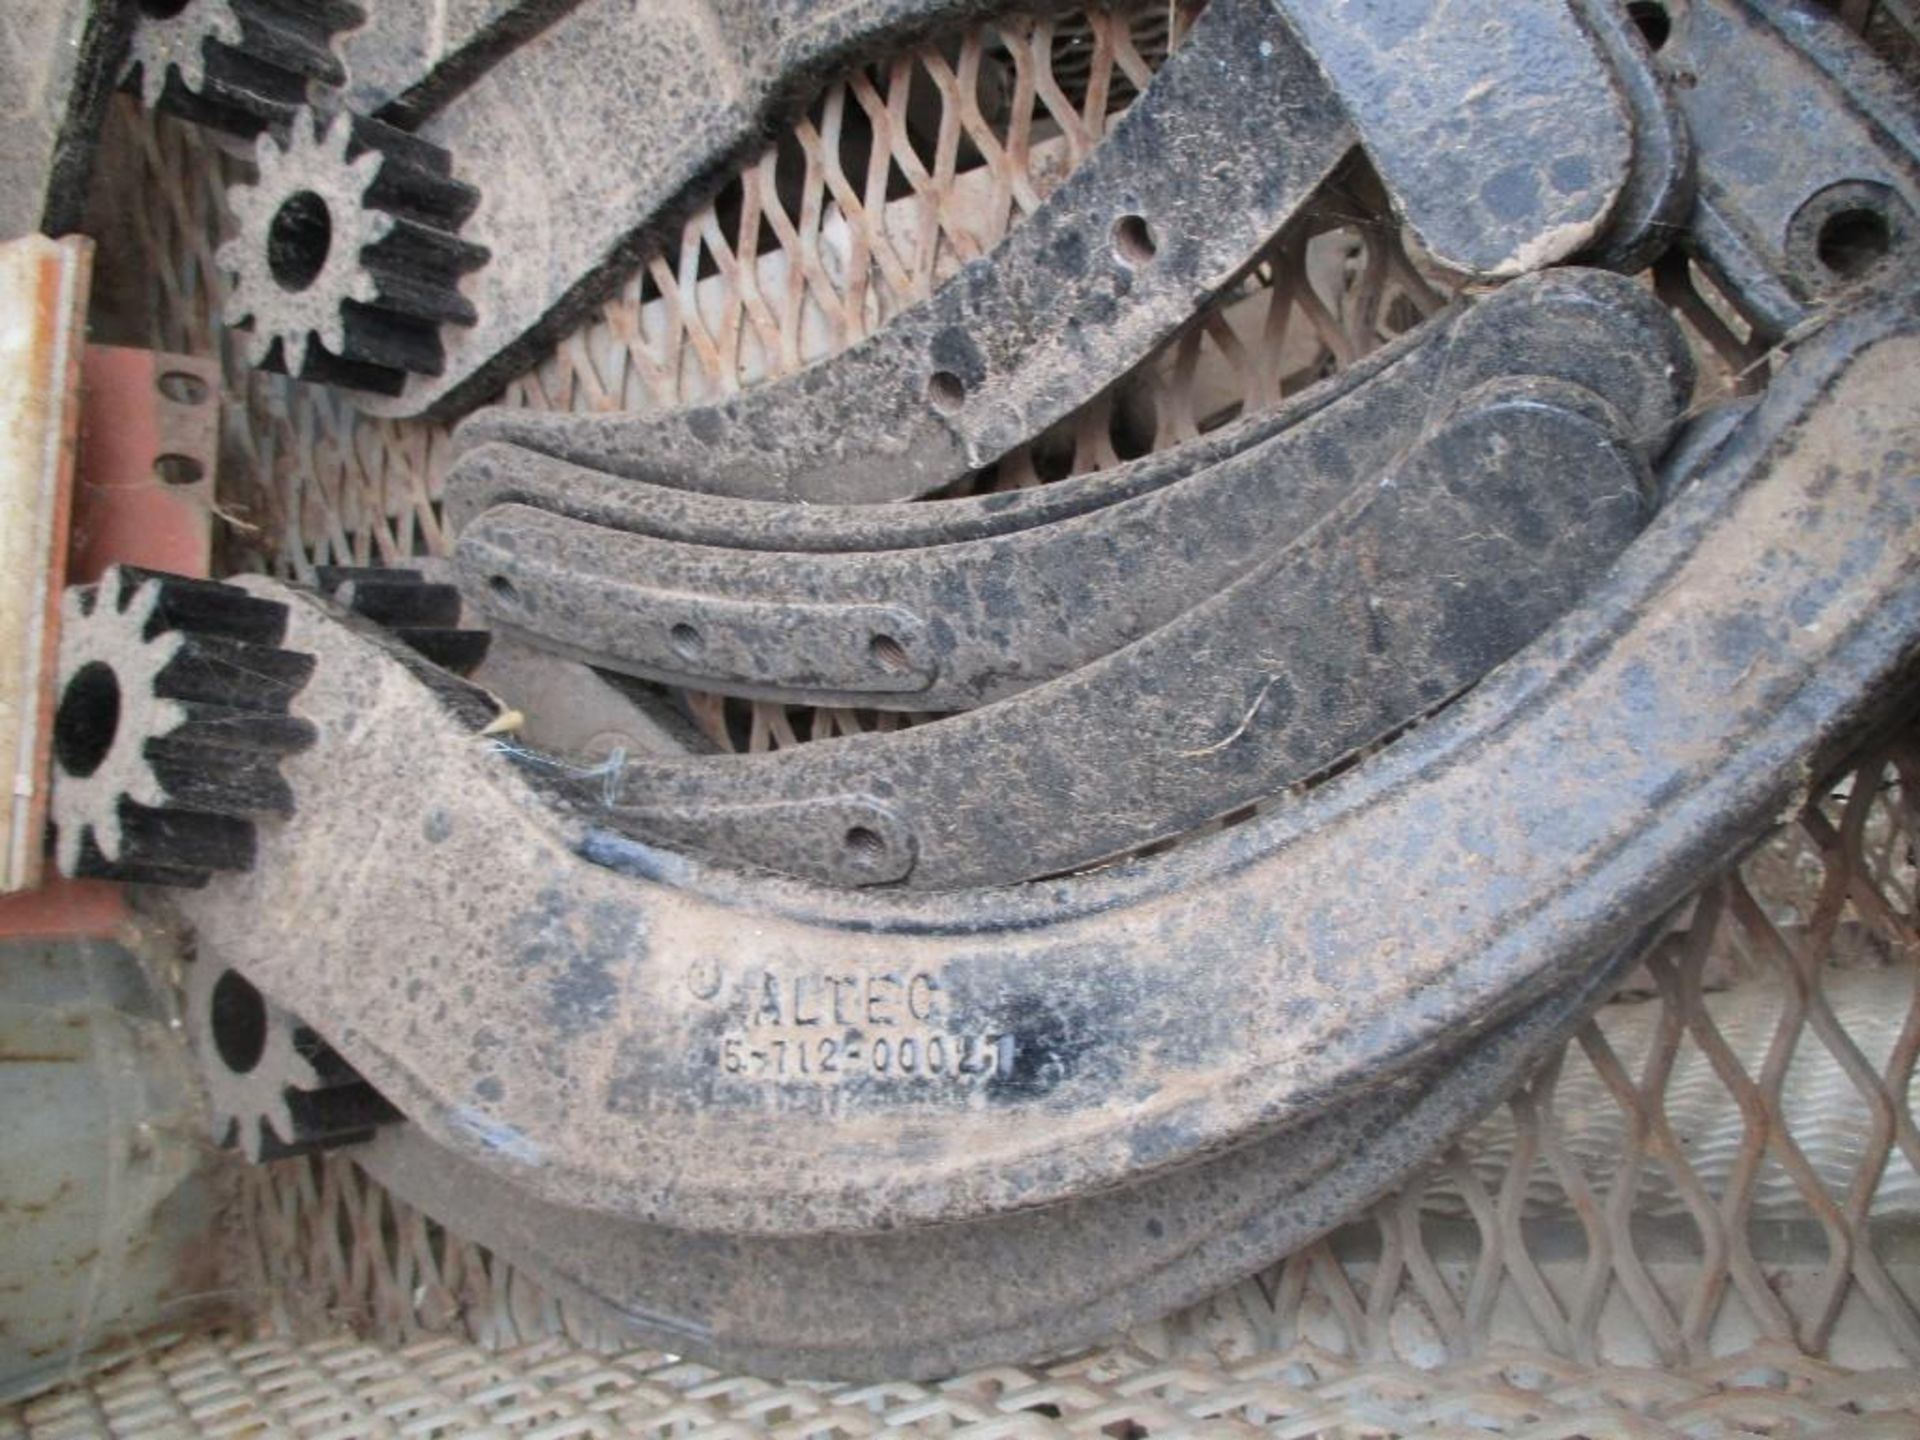 2 Auger bite collar brake parts tons of auger teeth  tire chains  u bolts  7 Altec  5-712-00027  All - Image 30 of 60